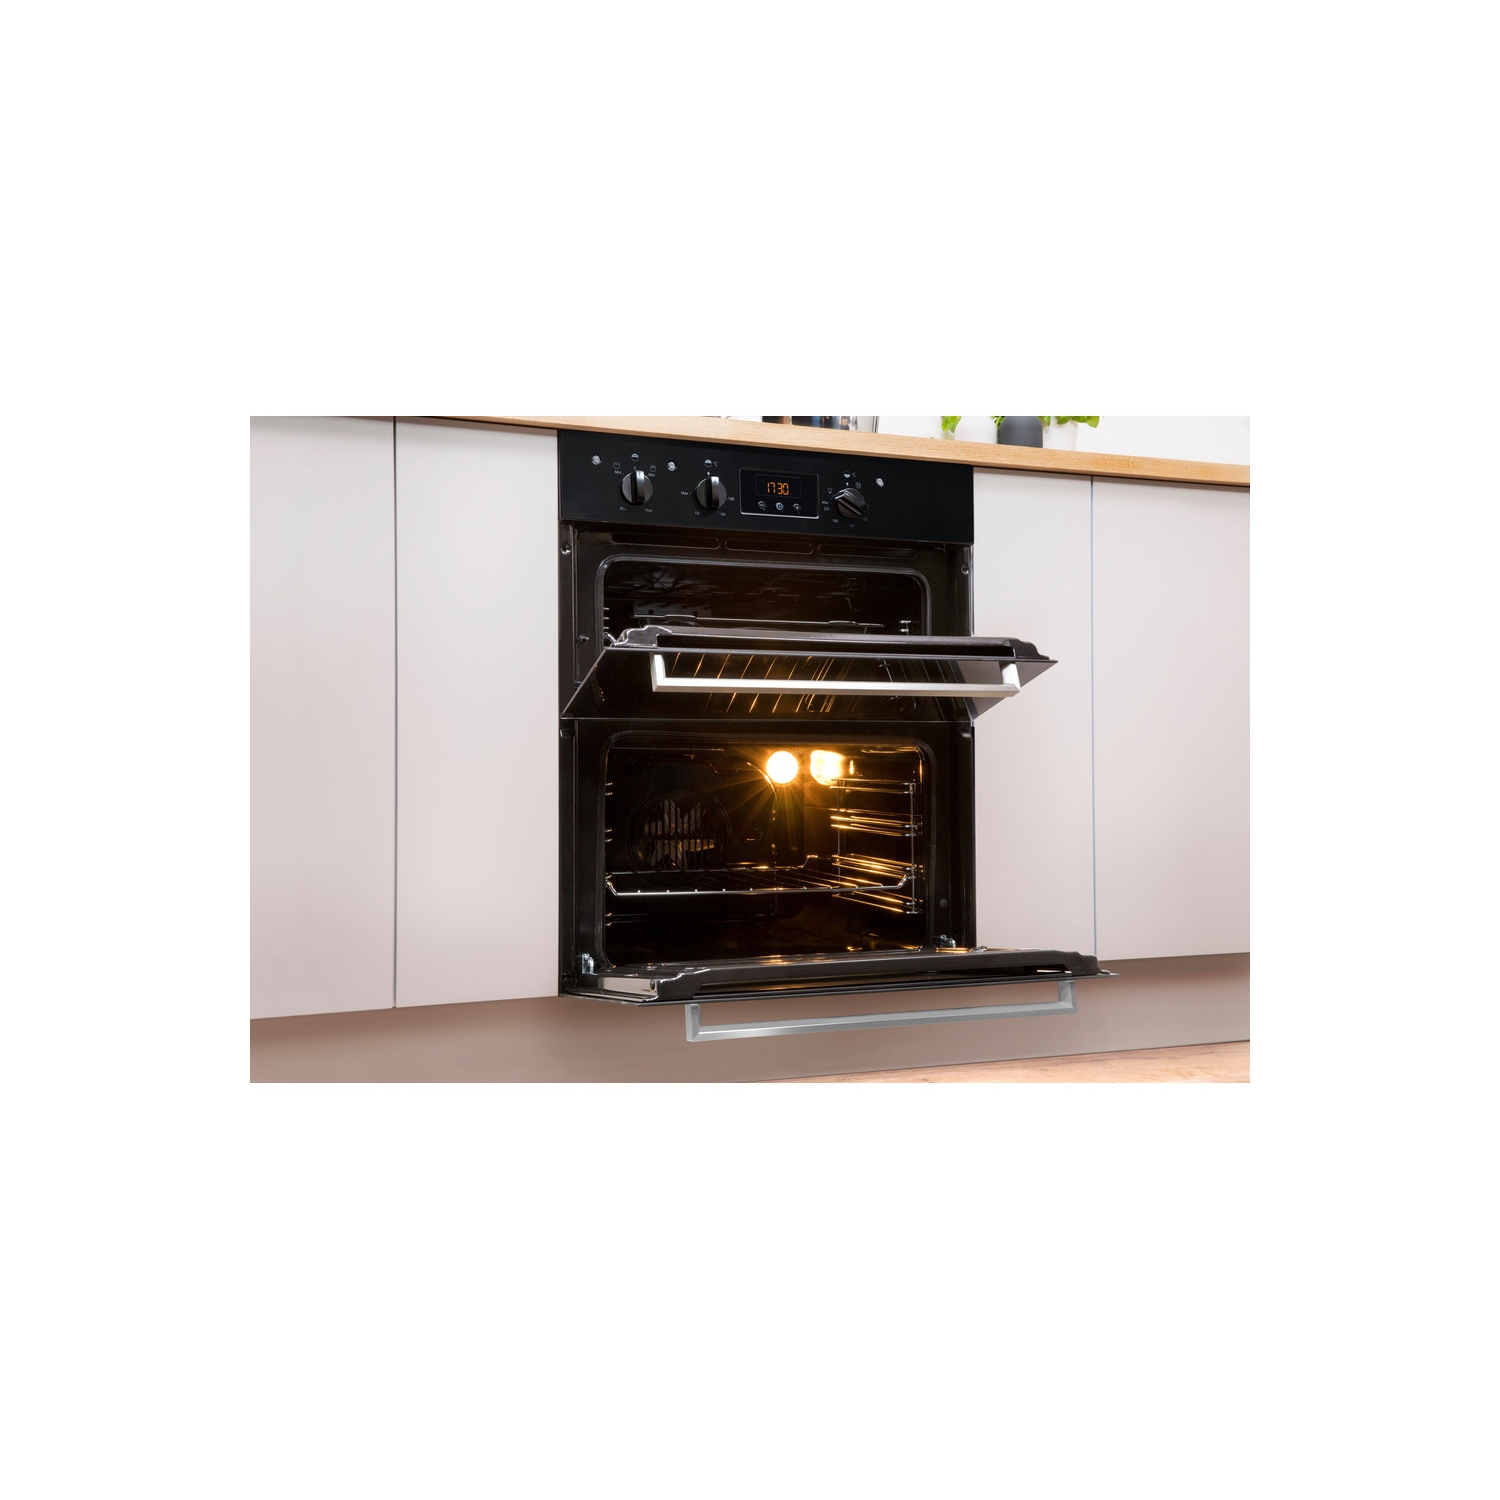 Indesit Built In Electric Double Oven - Black - B Rated - 5